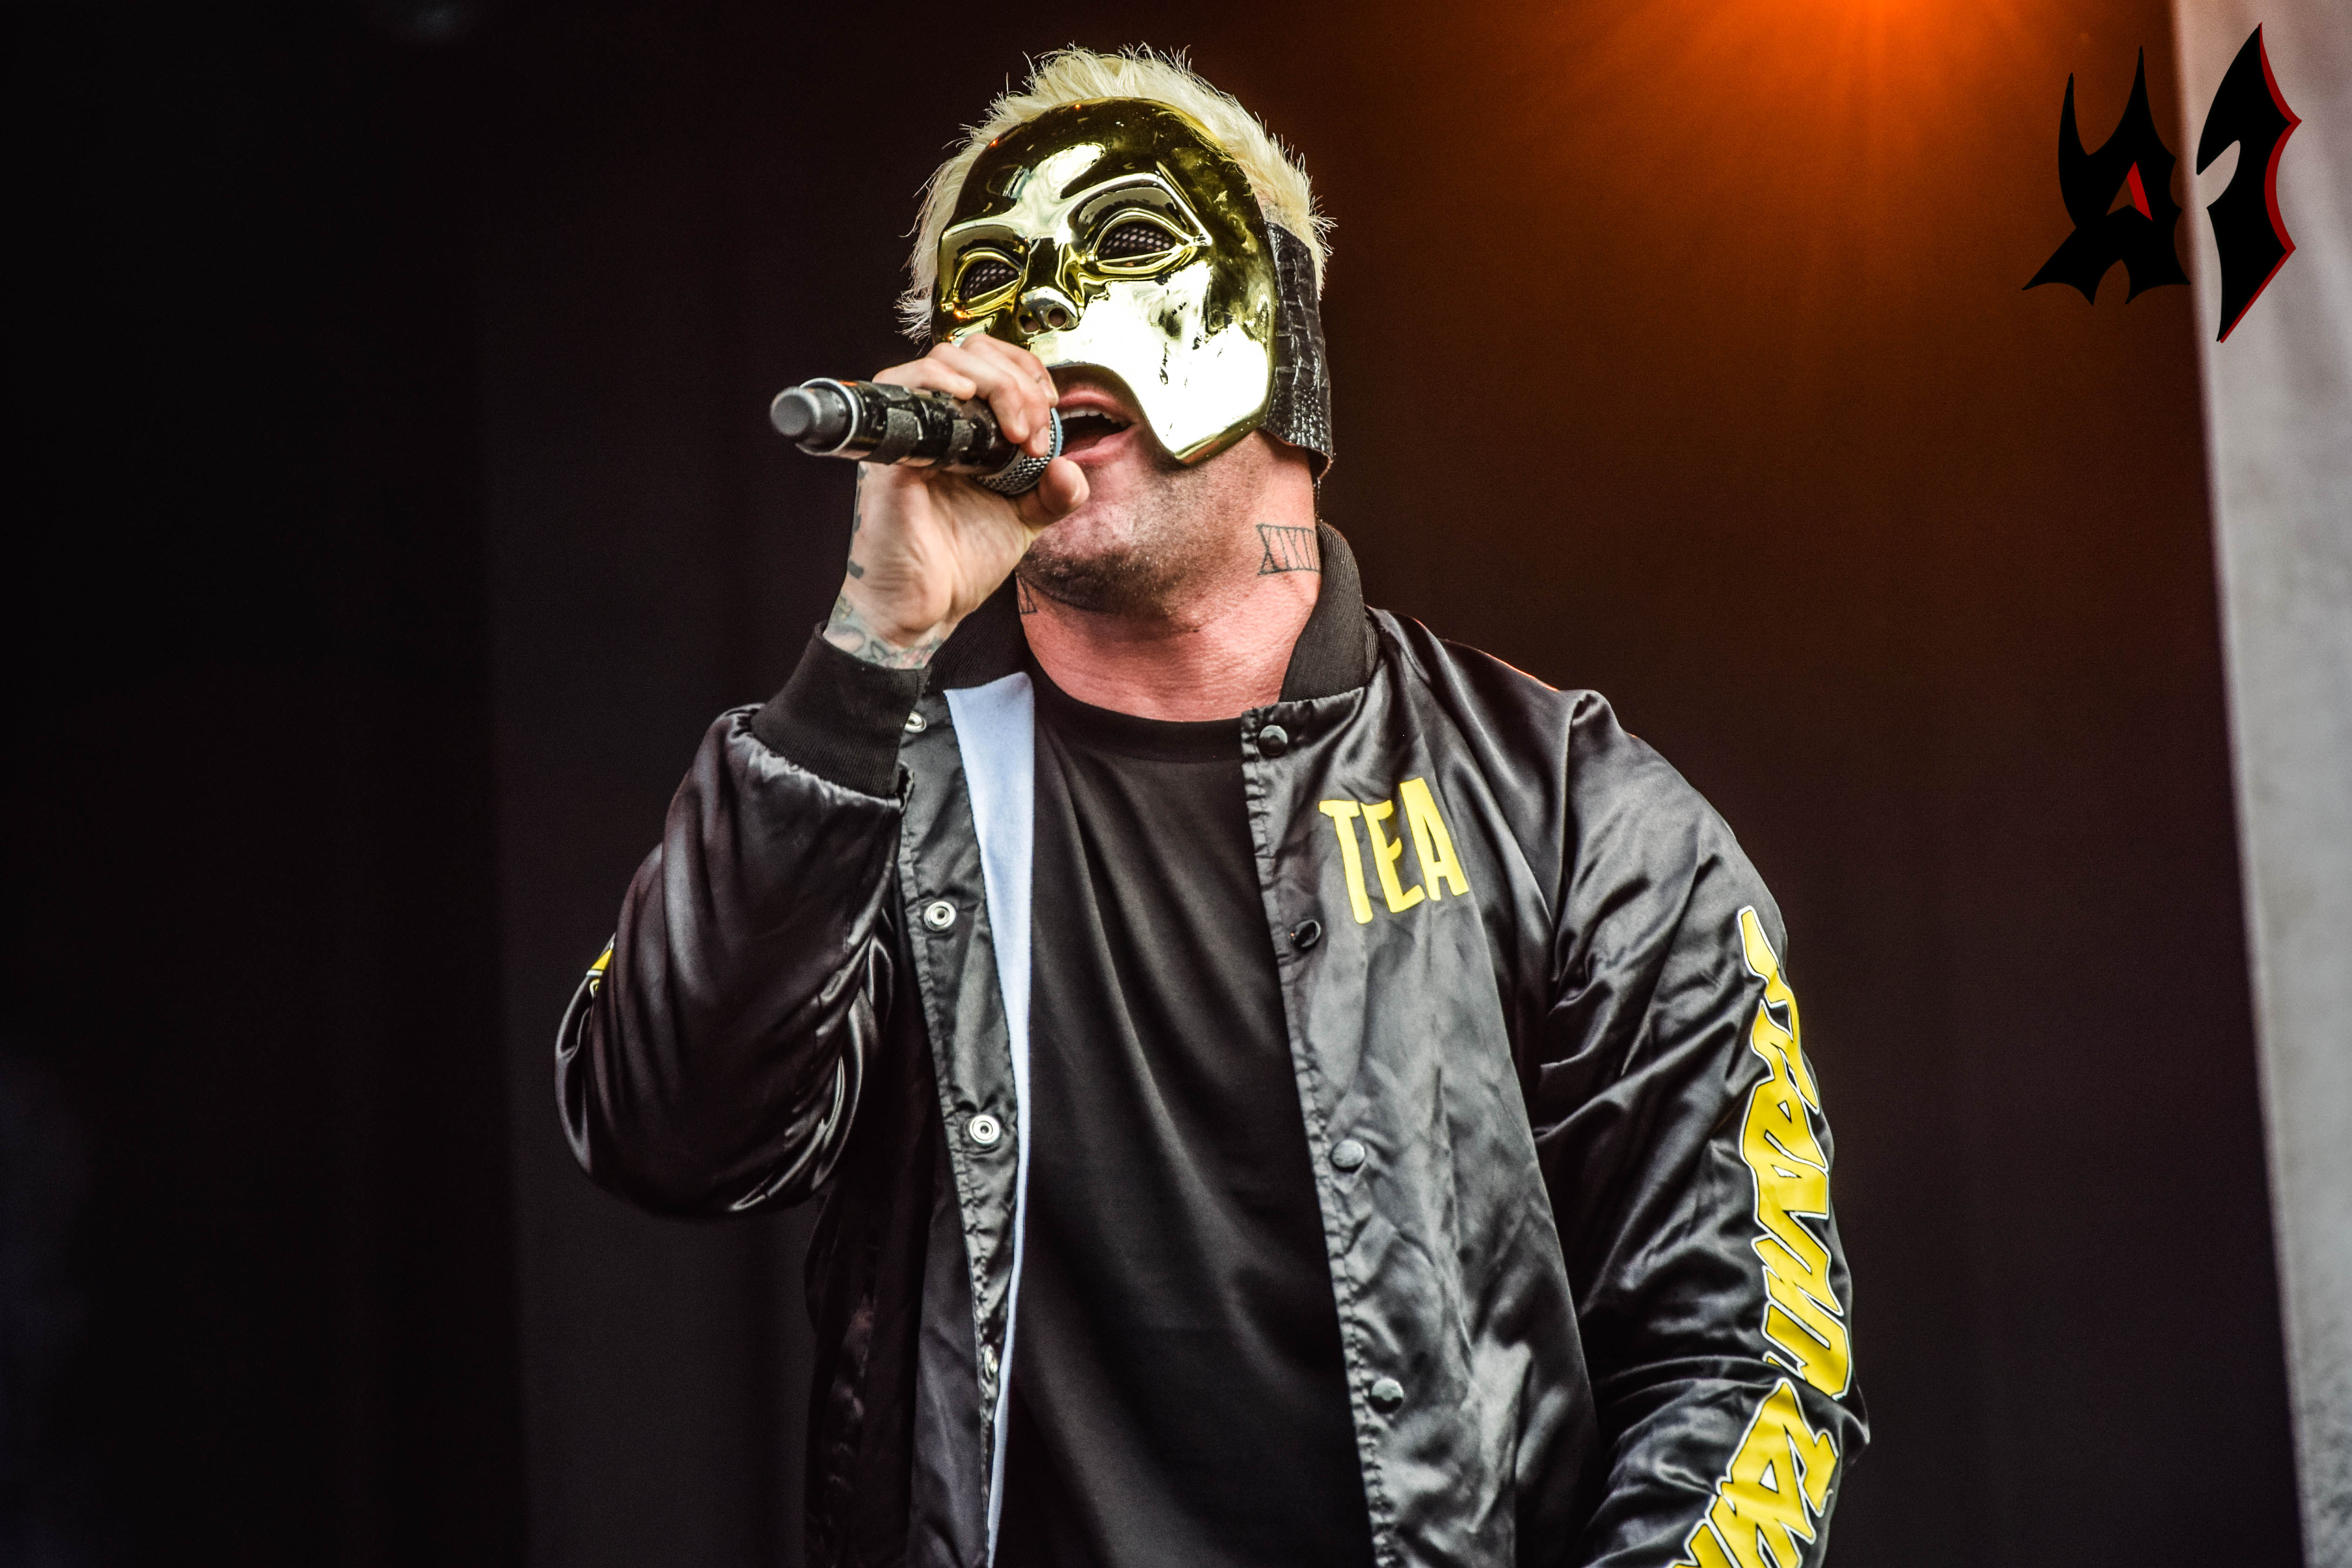 Donwload 2018 – Day 2 - Hollywood Undead 9